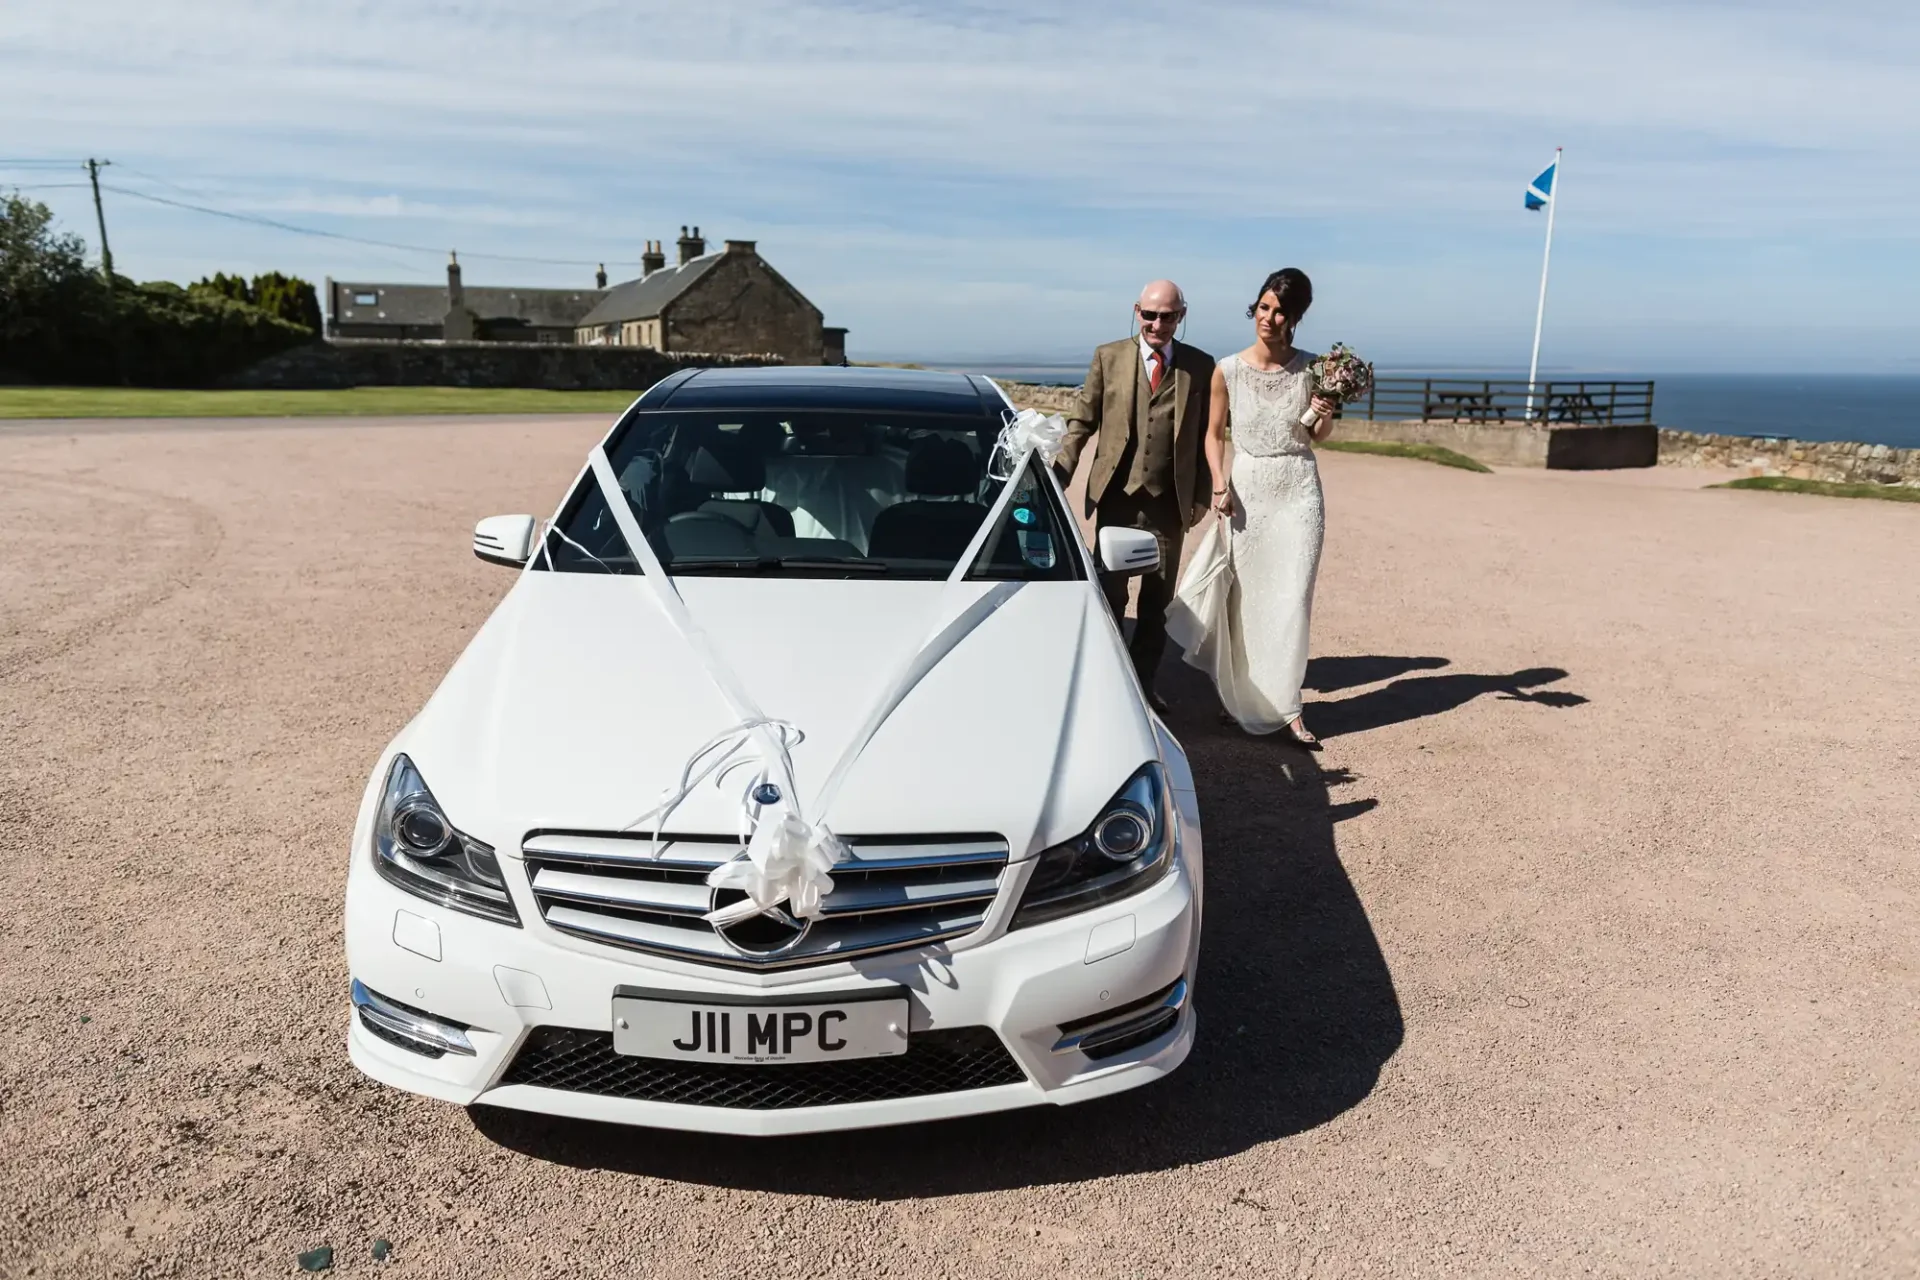 A bride and groom walking hand in hand beside a white decorated convertible car, with a scenic coastal backdrop and a clear blue sky.